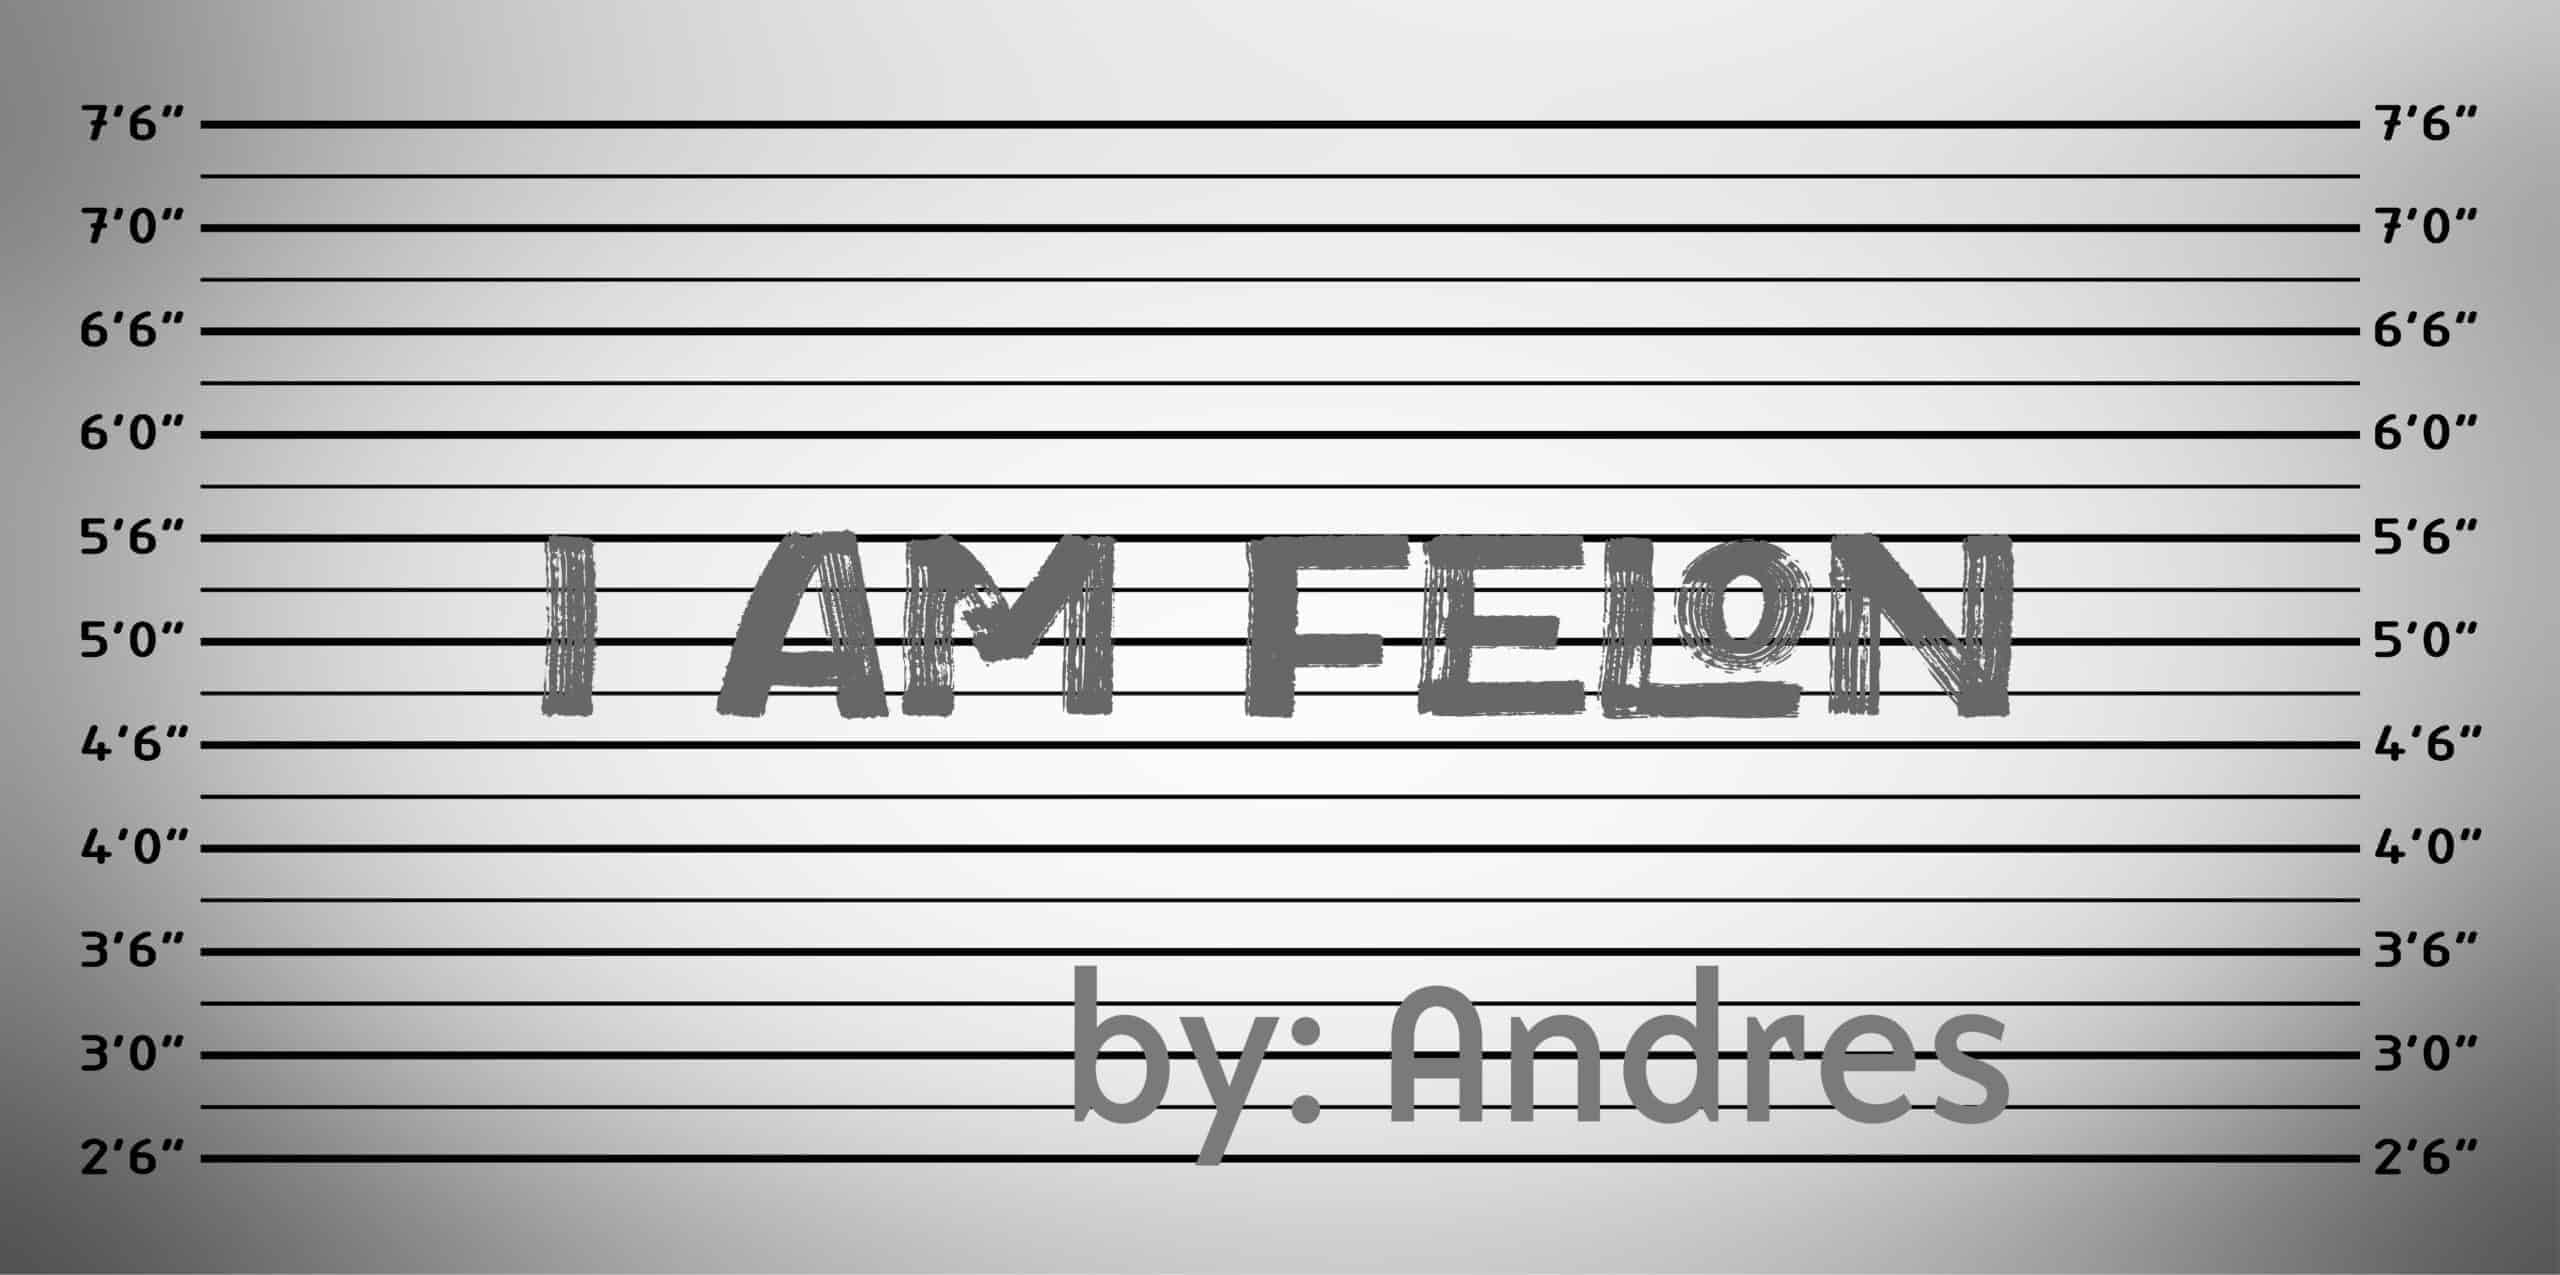 I Am Felon. I Am Human. Which One Matters More?